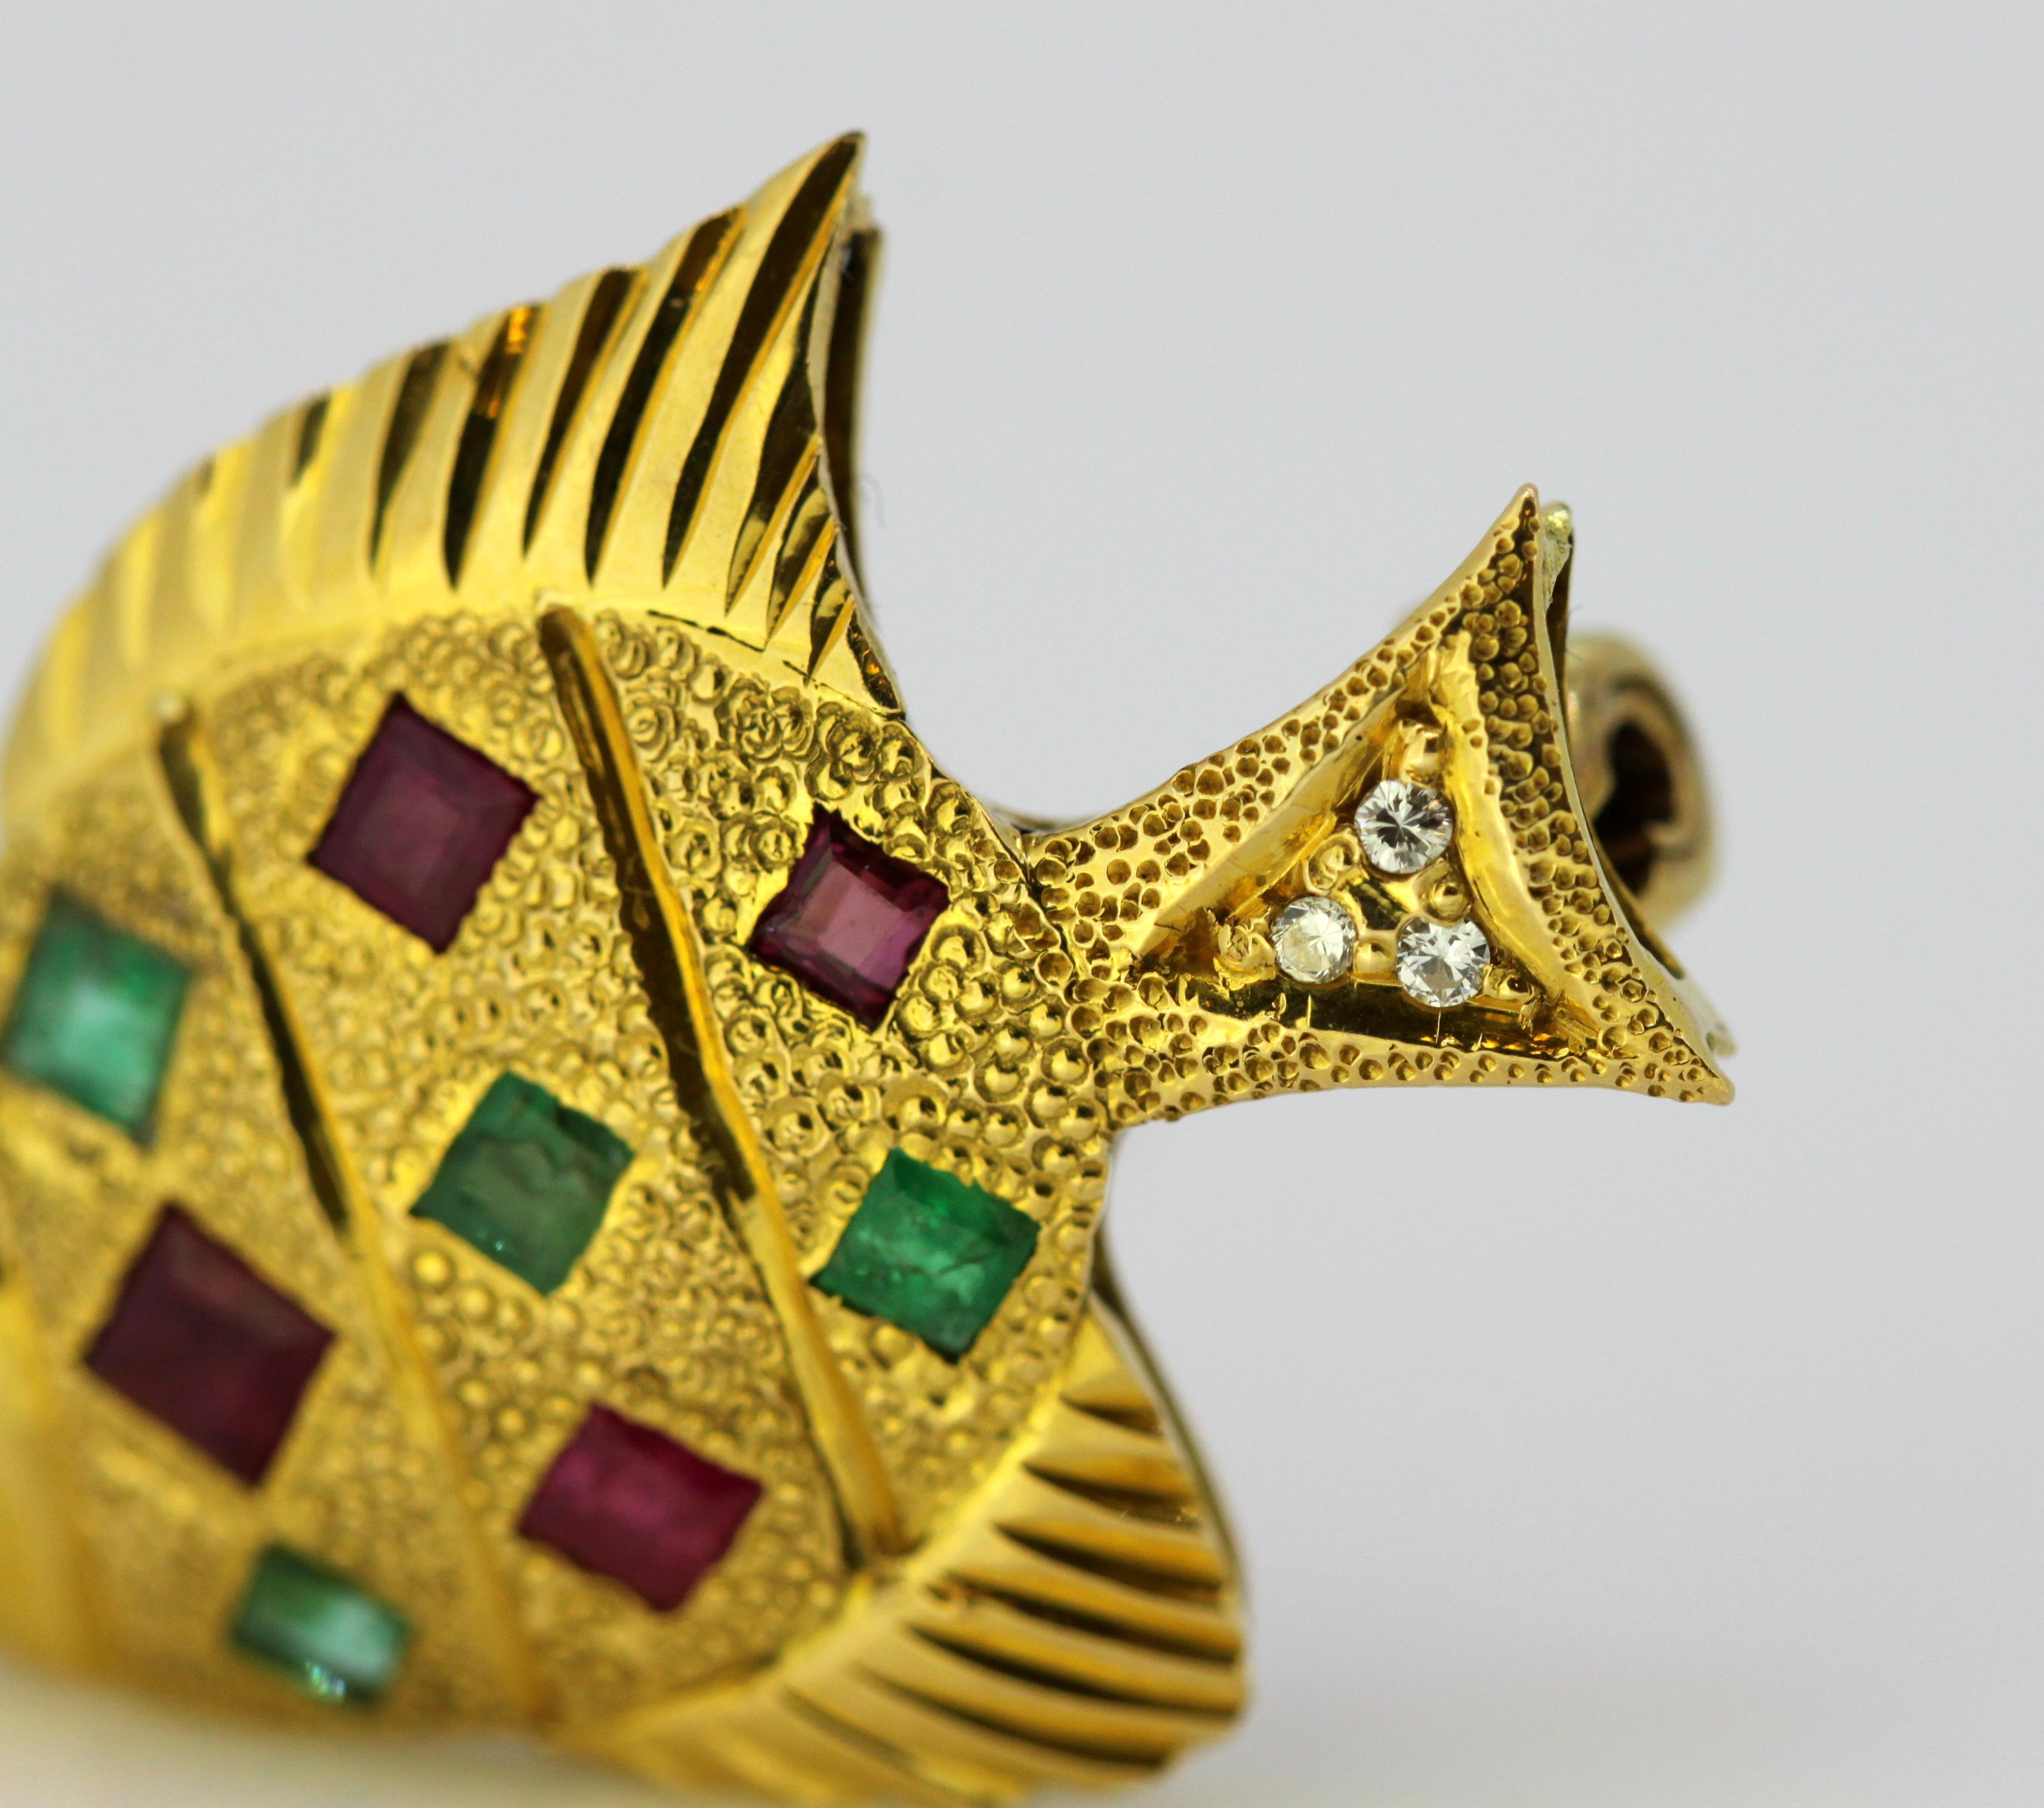 Vintage 18 Karat Gold Brooch/Pendant in the Shape of a Fish, circa 1970s 1